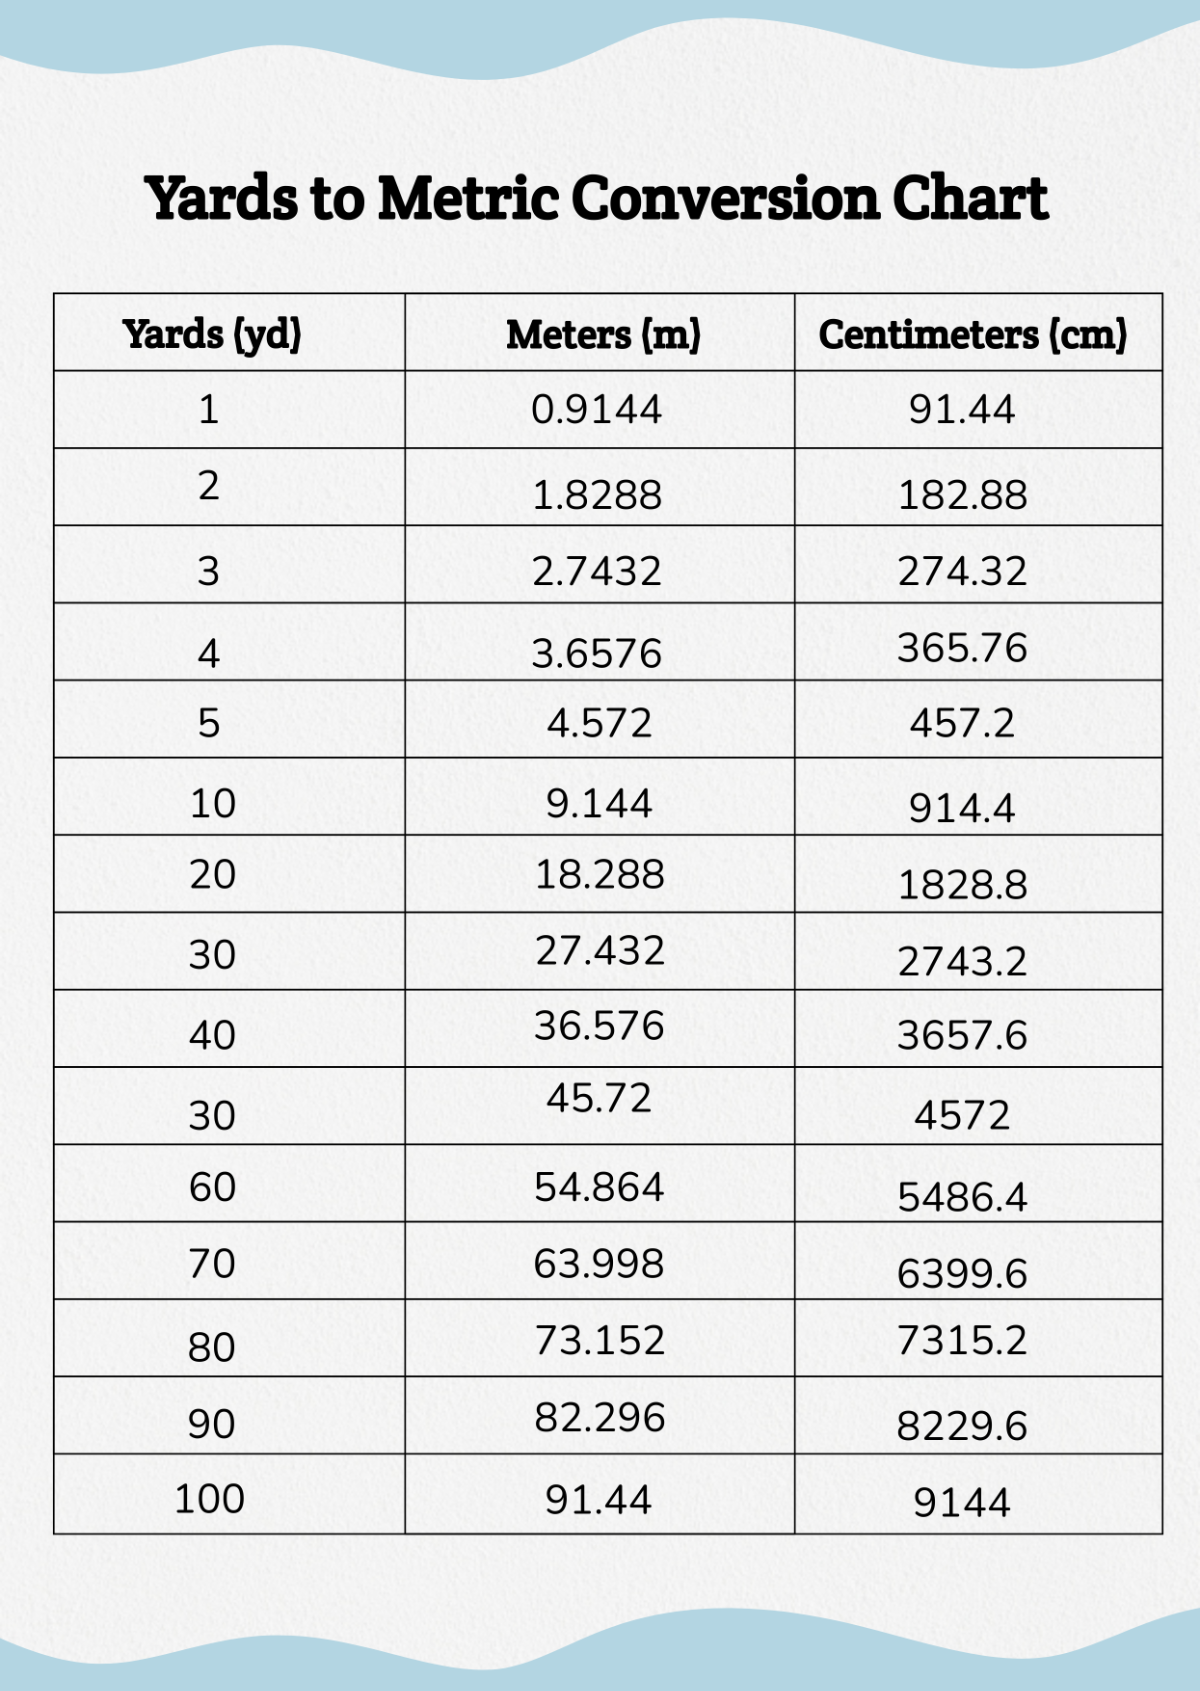 Yards to Metric Conversion Chart